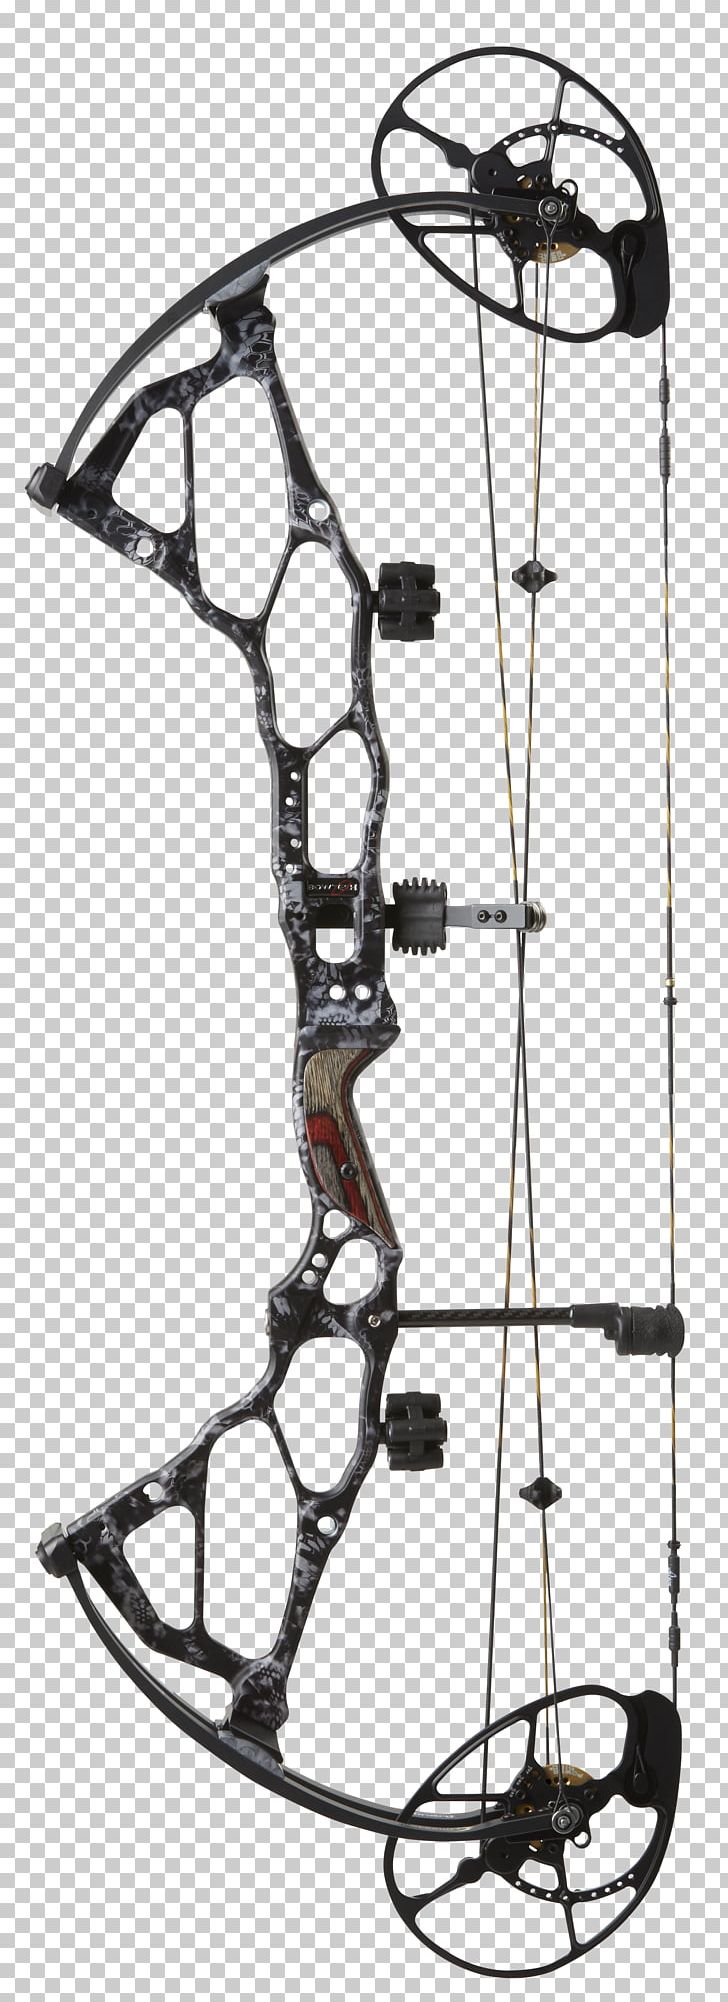 Bow And Arrow Compound Bows Archery Bowhunting PNG, Clipart,  Free PNG Download